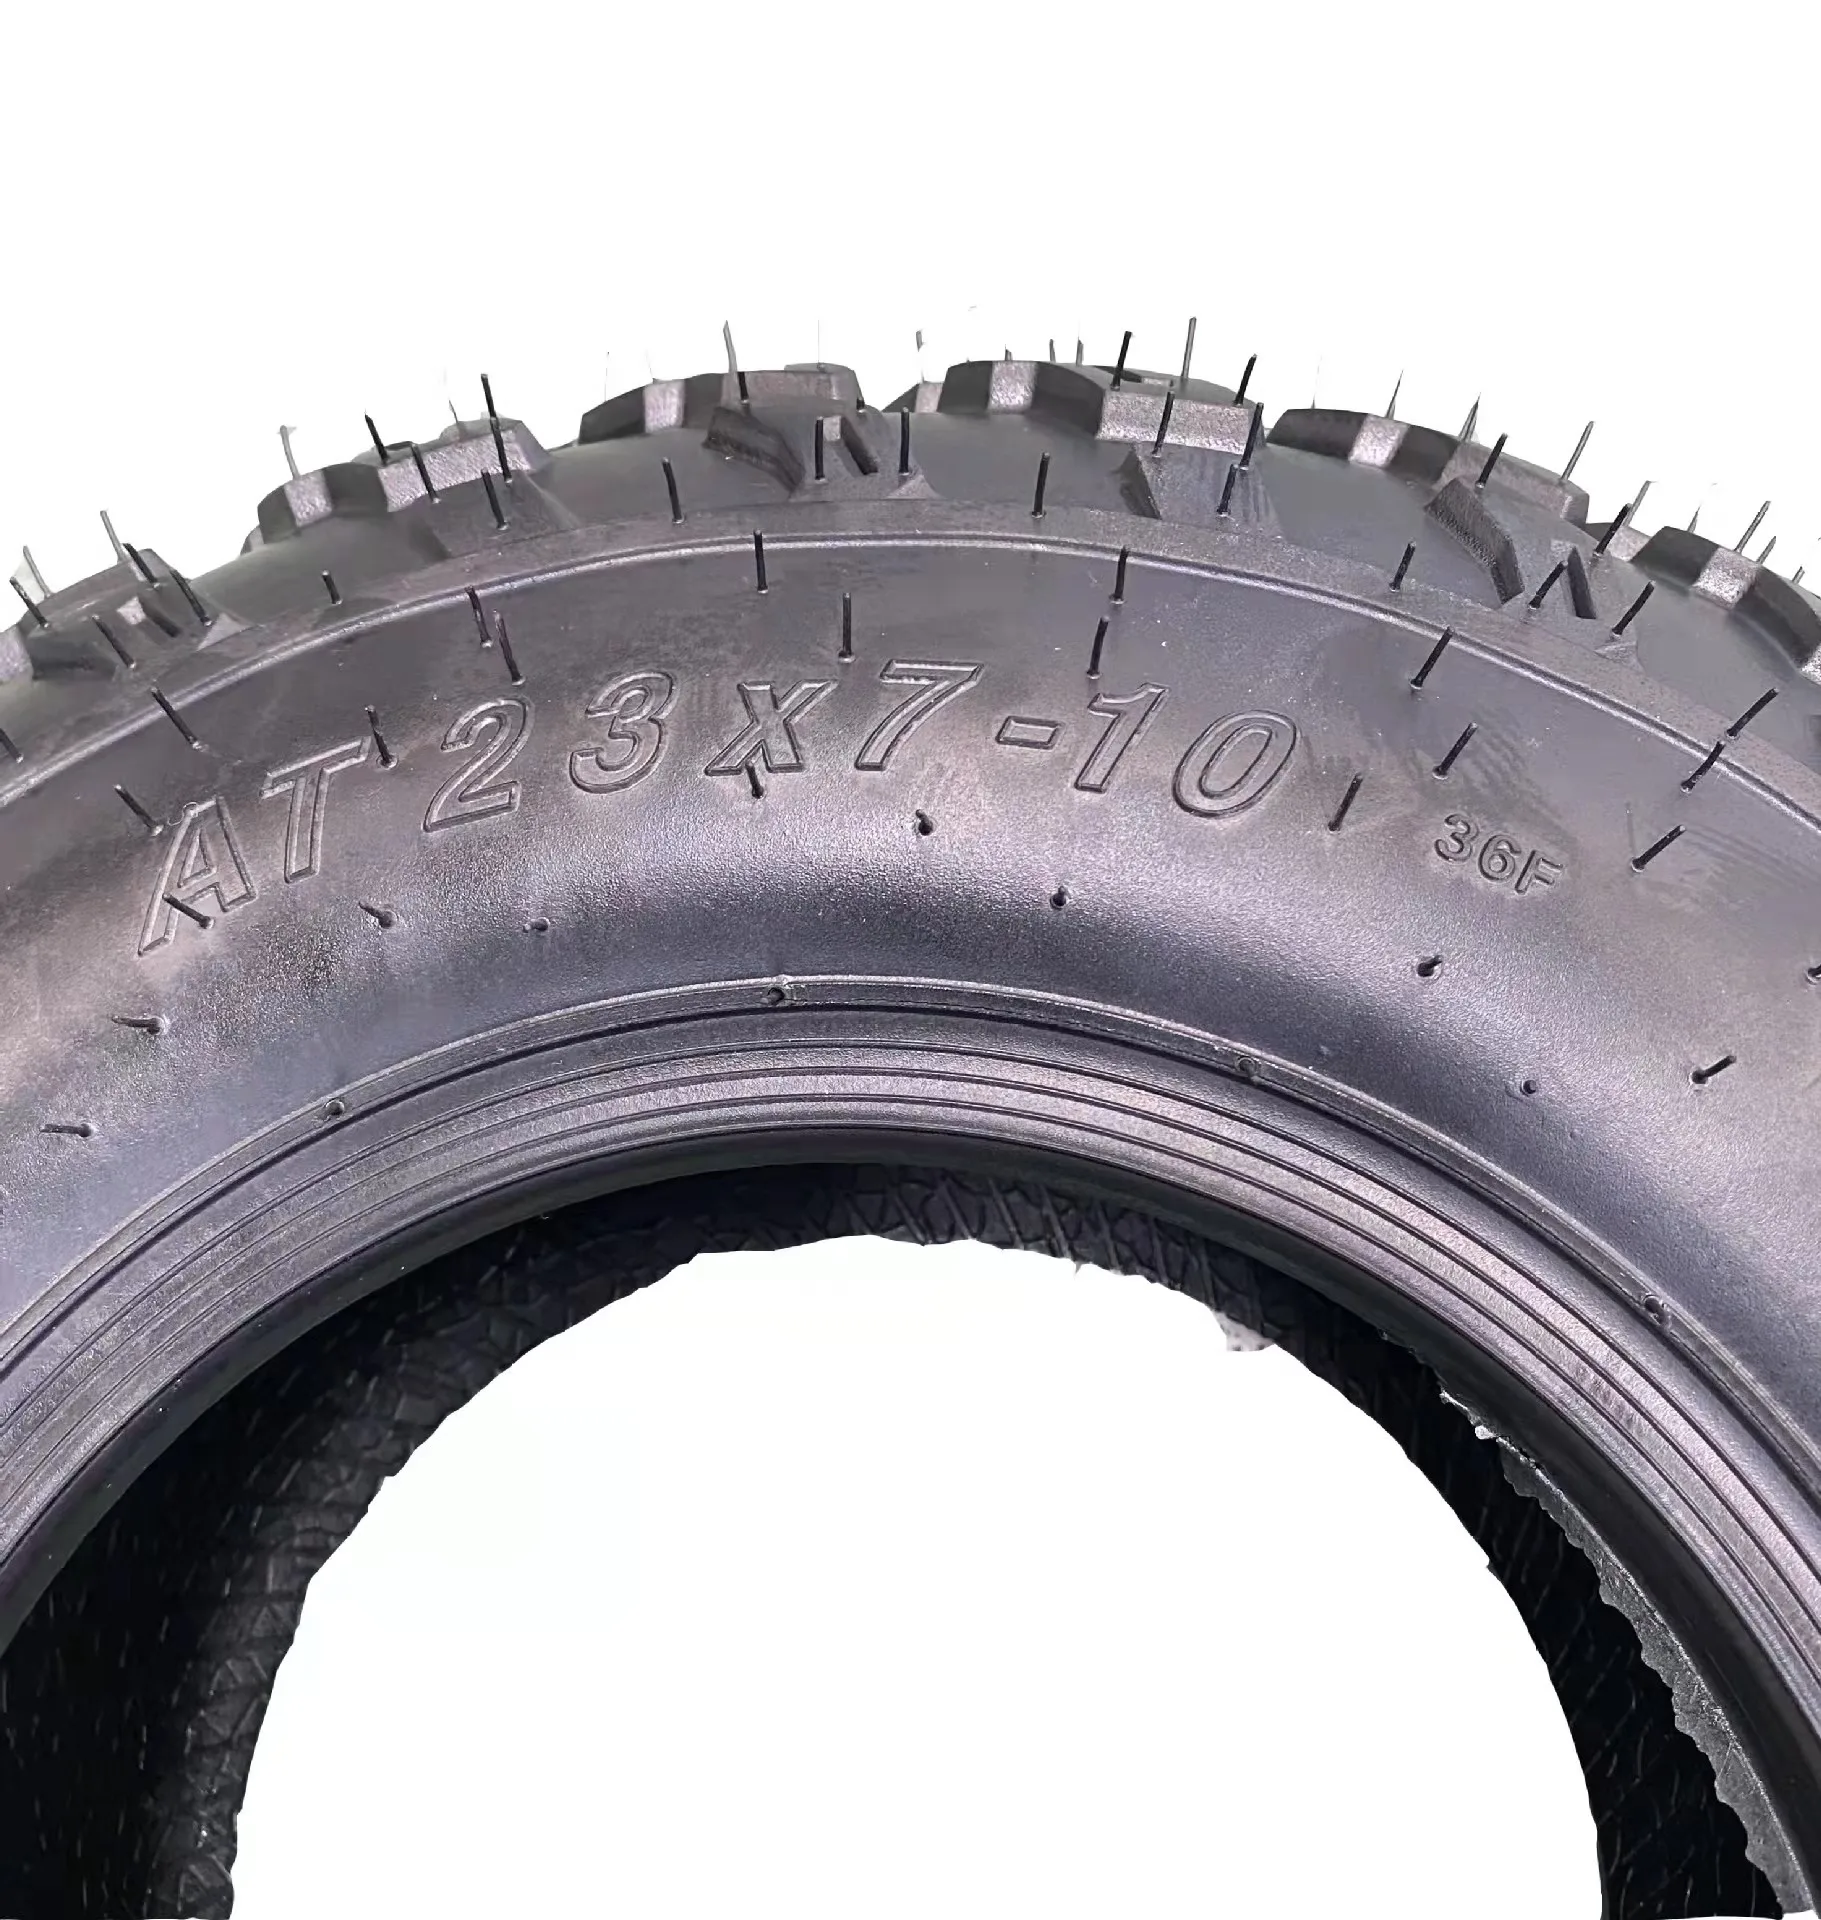 What Do the Numbers Mean on Atv Tires 